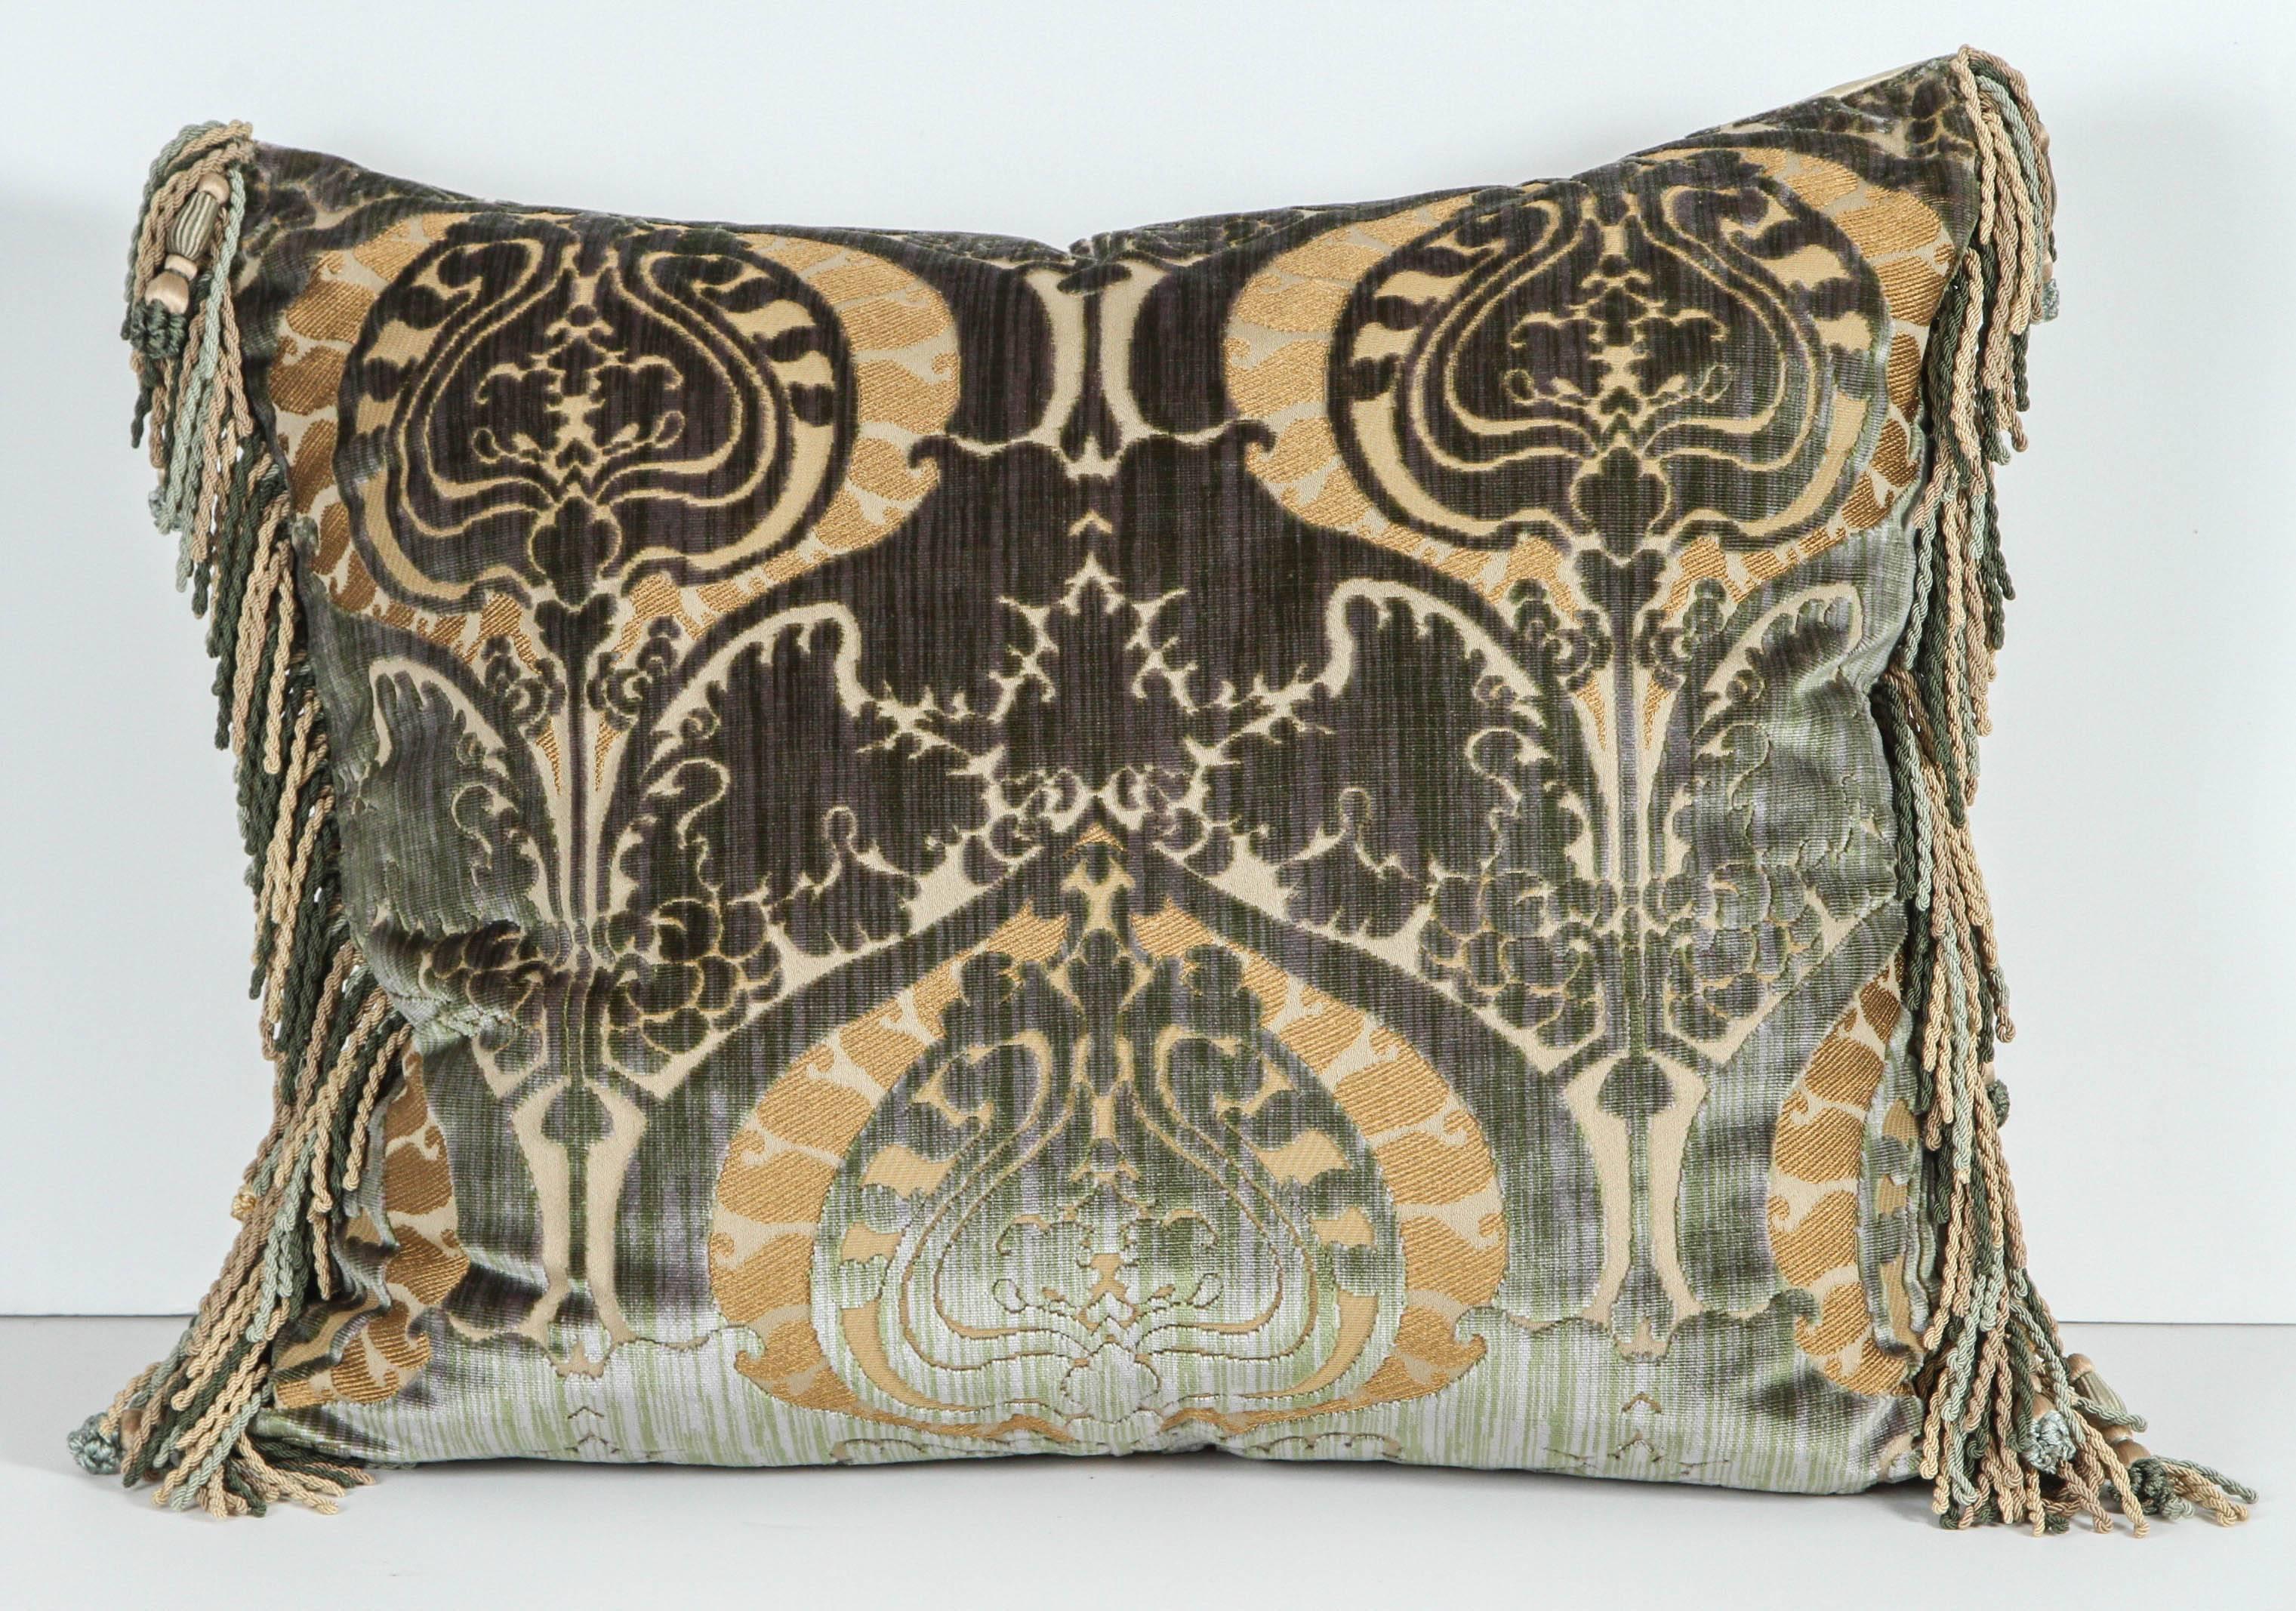 Pair of Luigi Bevilacqua silk velvet pillows with silk trim and silk velvet backing in golds and greens. Featuring Janet Yonati silk velvet backing and trim. Luigi Bevilacquat is the official fabric maker to the Vatican. The price listed for one